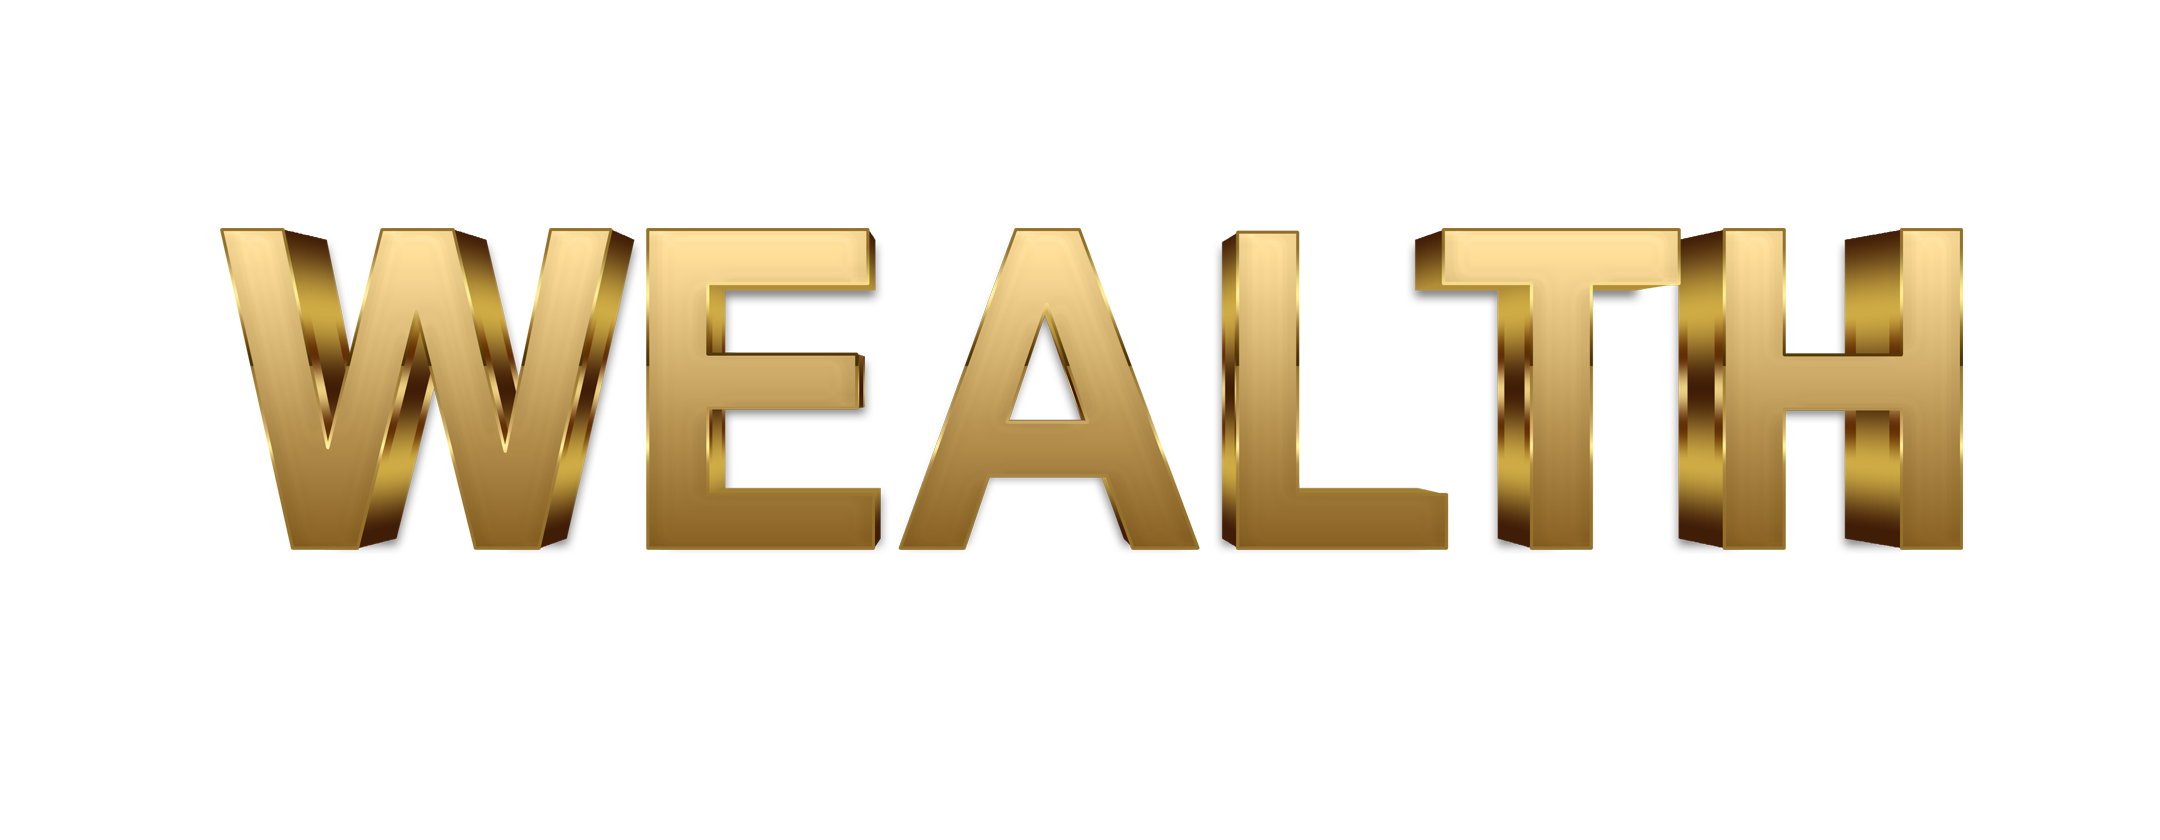 Wealth word png, Wealth png, word Wealth gold text typography PNG images Wealth png transparent background